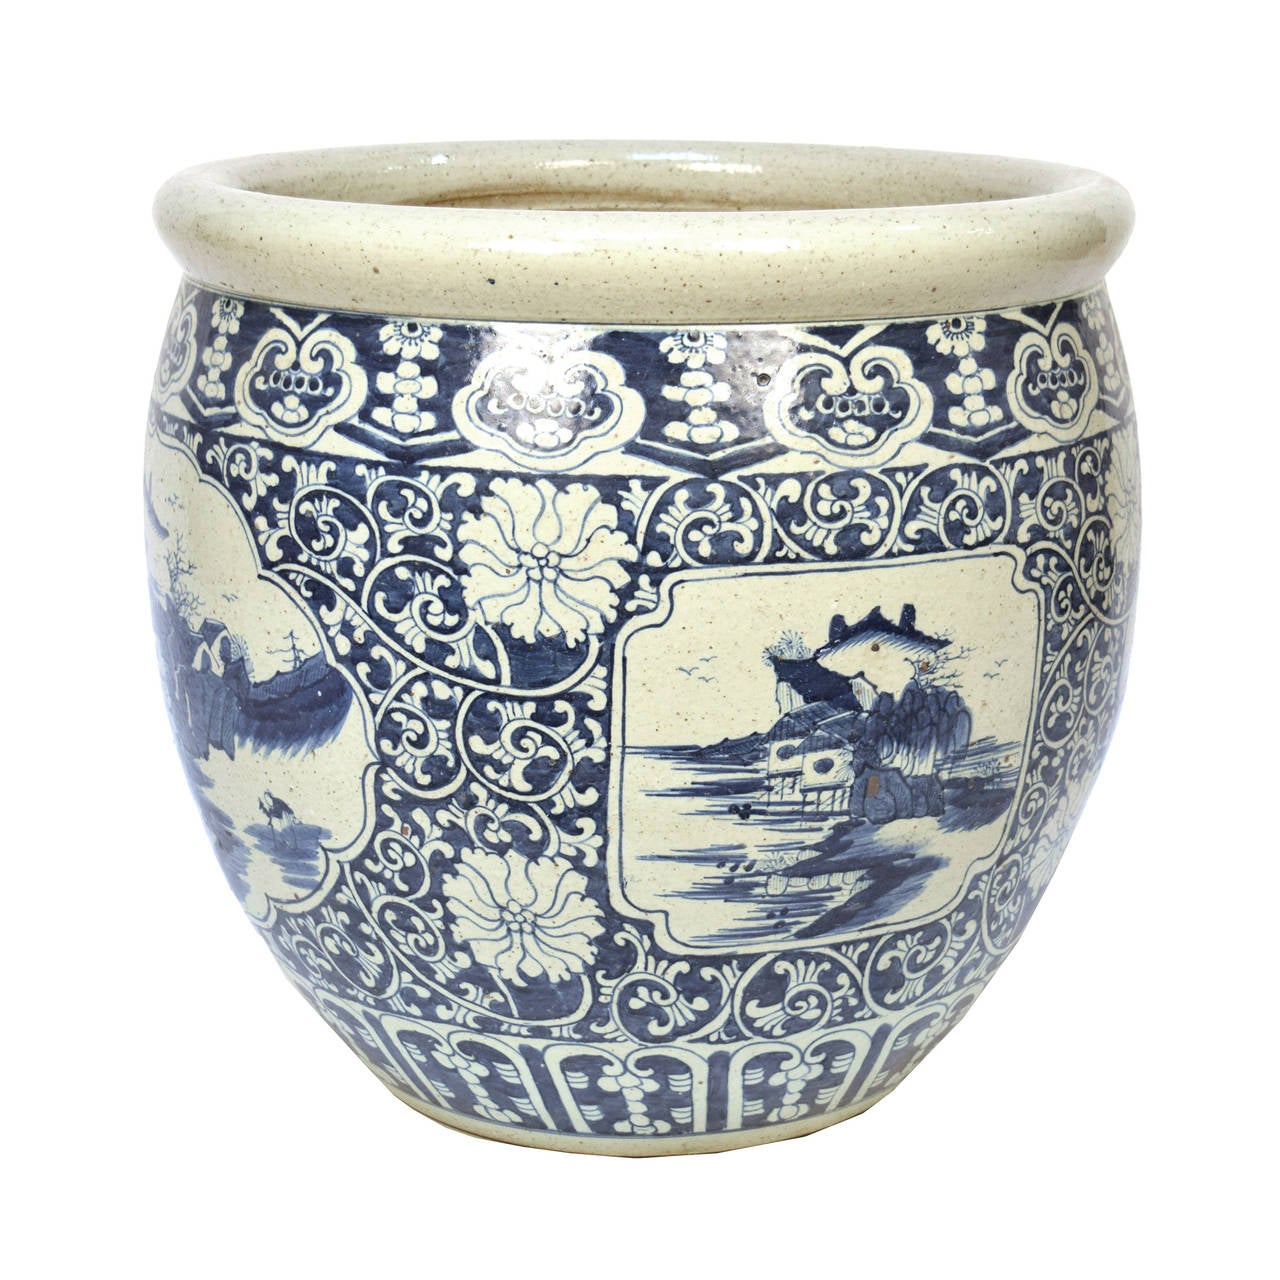 Chinese Vintage Blue and White Fish Bowl with Shan Shui Landscape